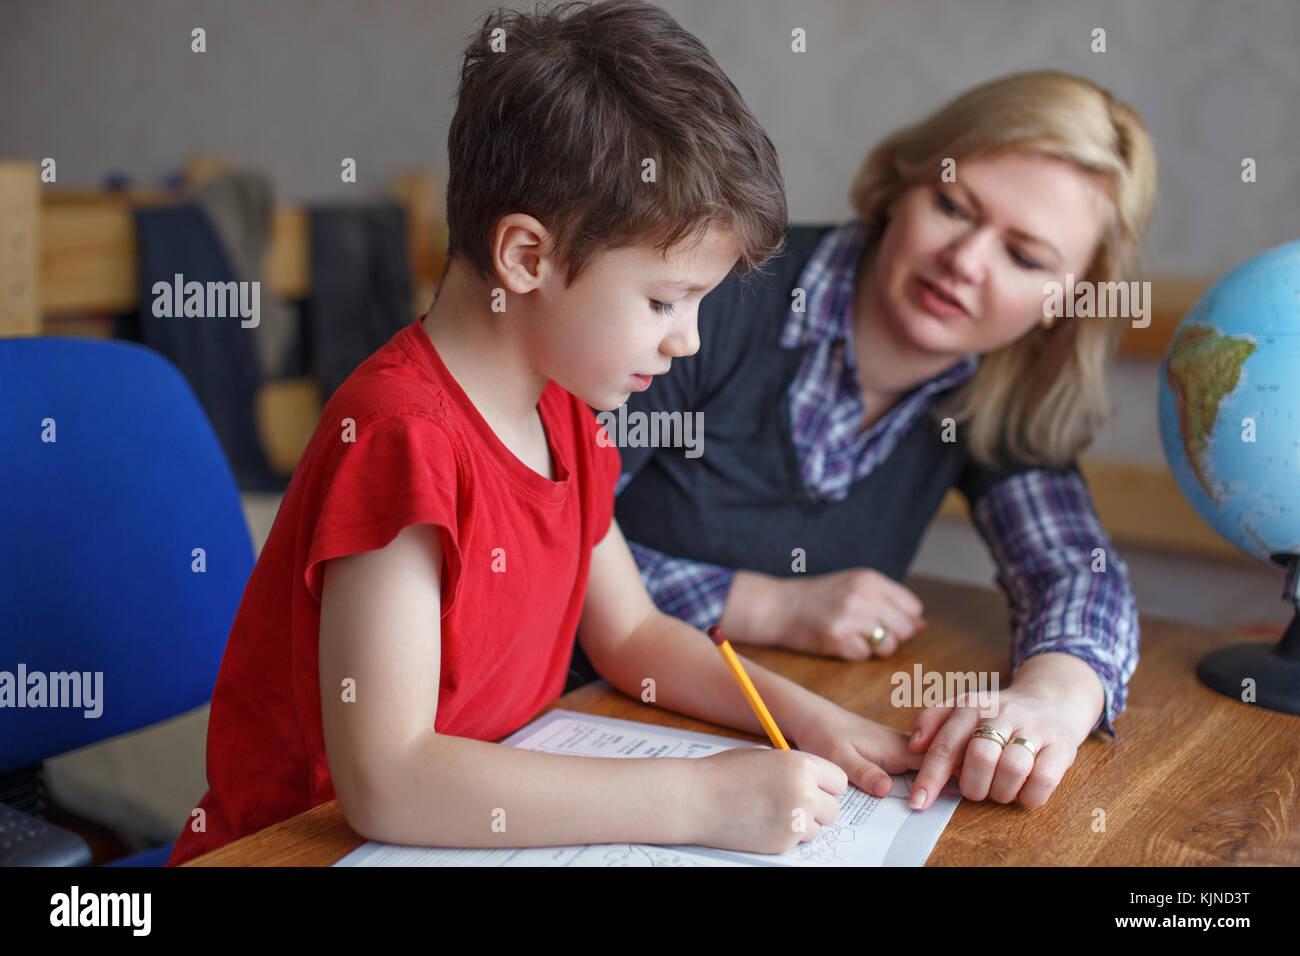 Mother helps son writing homework into exercise book, helpful hand, studying together at home on desk Stock Photo